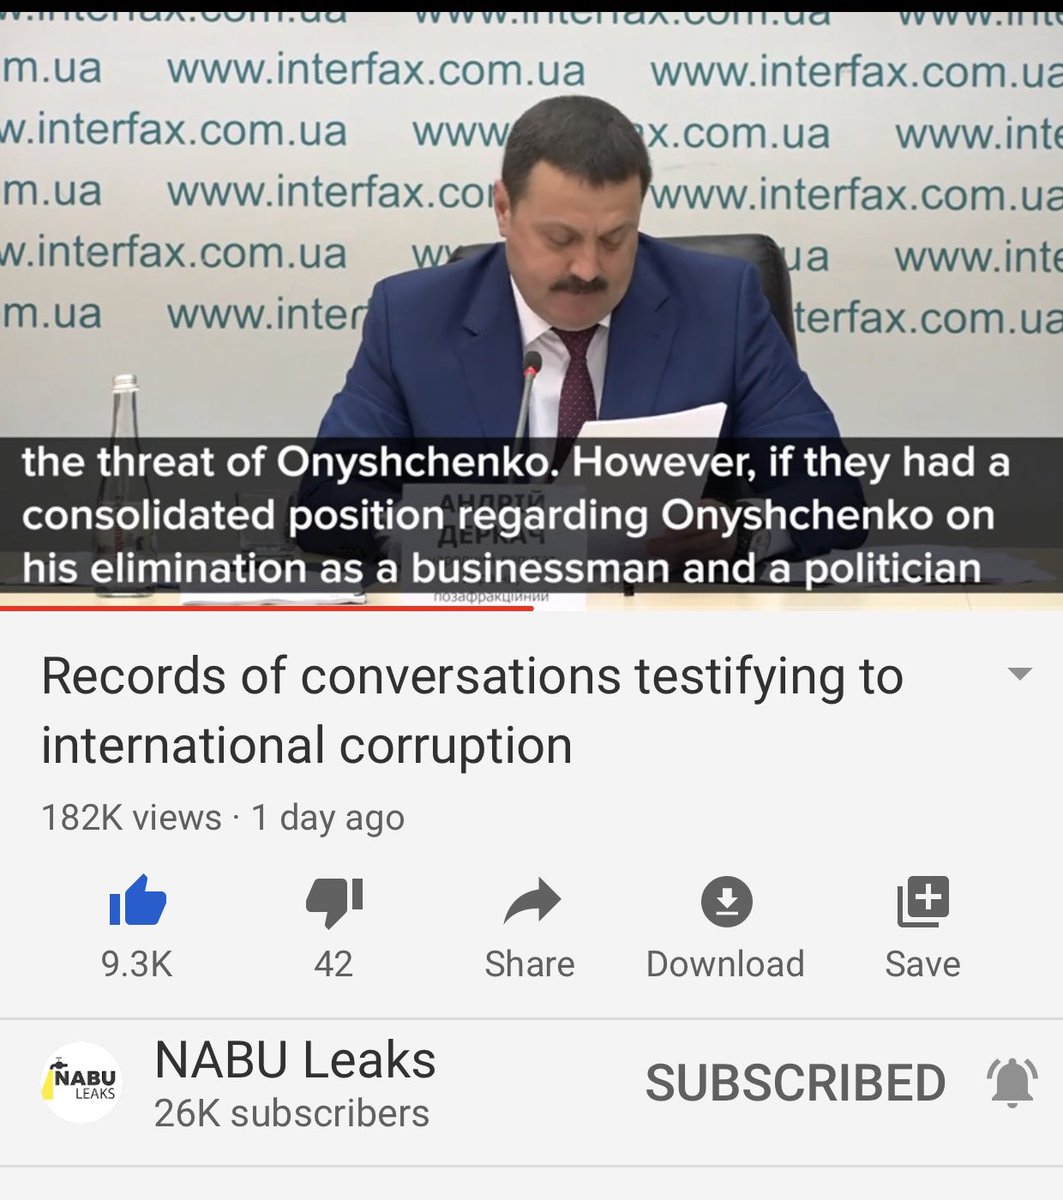 Investigators sum up the call, pointing out that Onyshchenko is a threat becuz he’s not controlled by Biden as Poroshenko is and Mr O is also a gas competitor. Biden’s henchman Arseniy is confirmed and he’s not just some independent biz man.